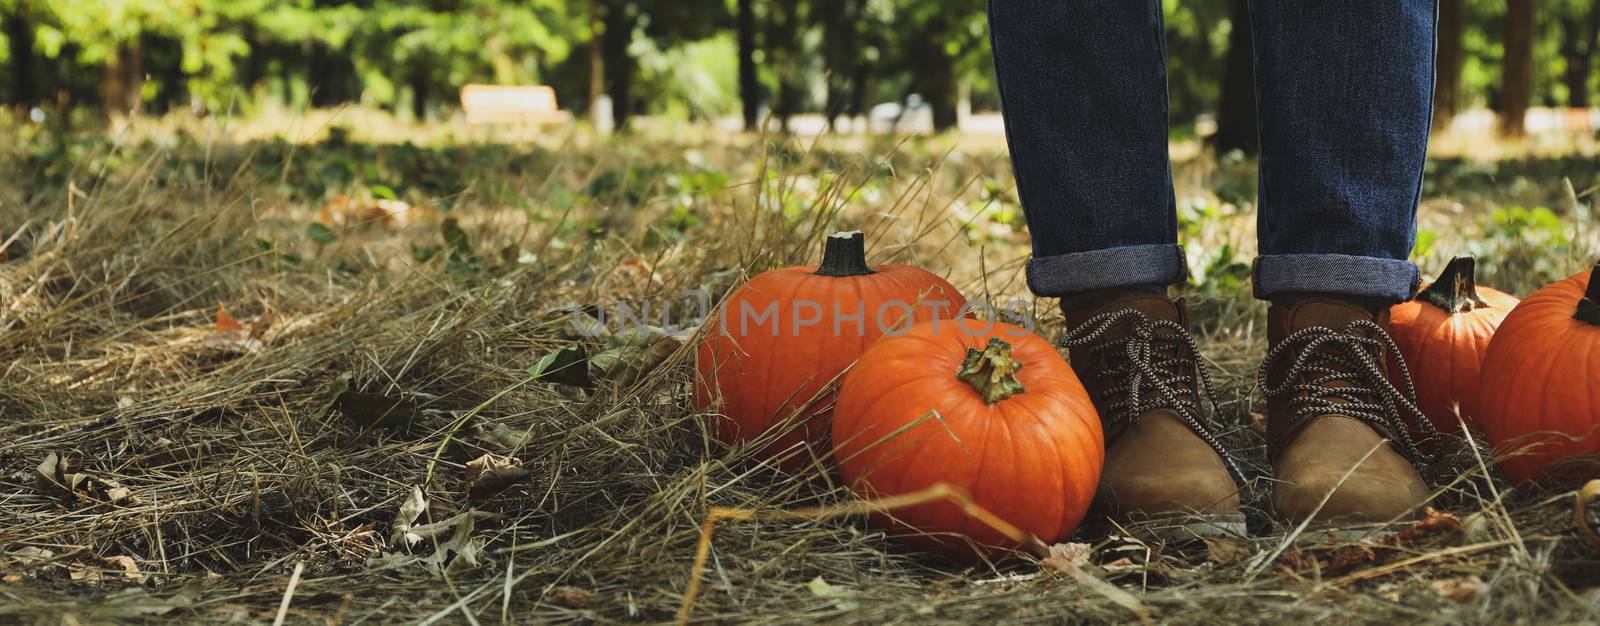 Autumn concept with pumpkins and woman in jeans and boots by AtlasCompany